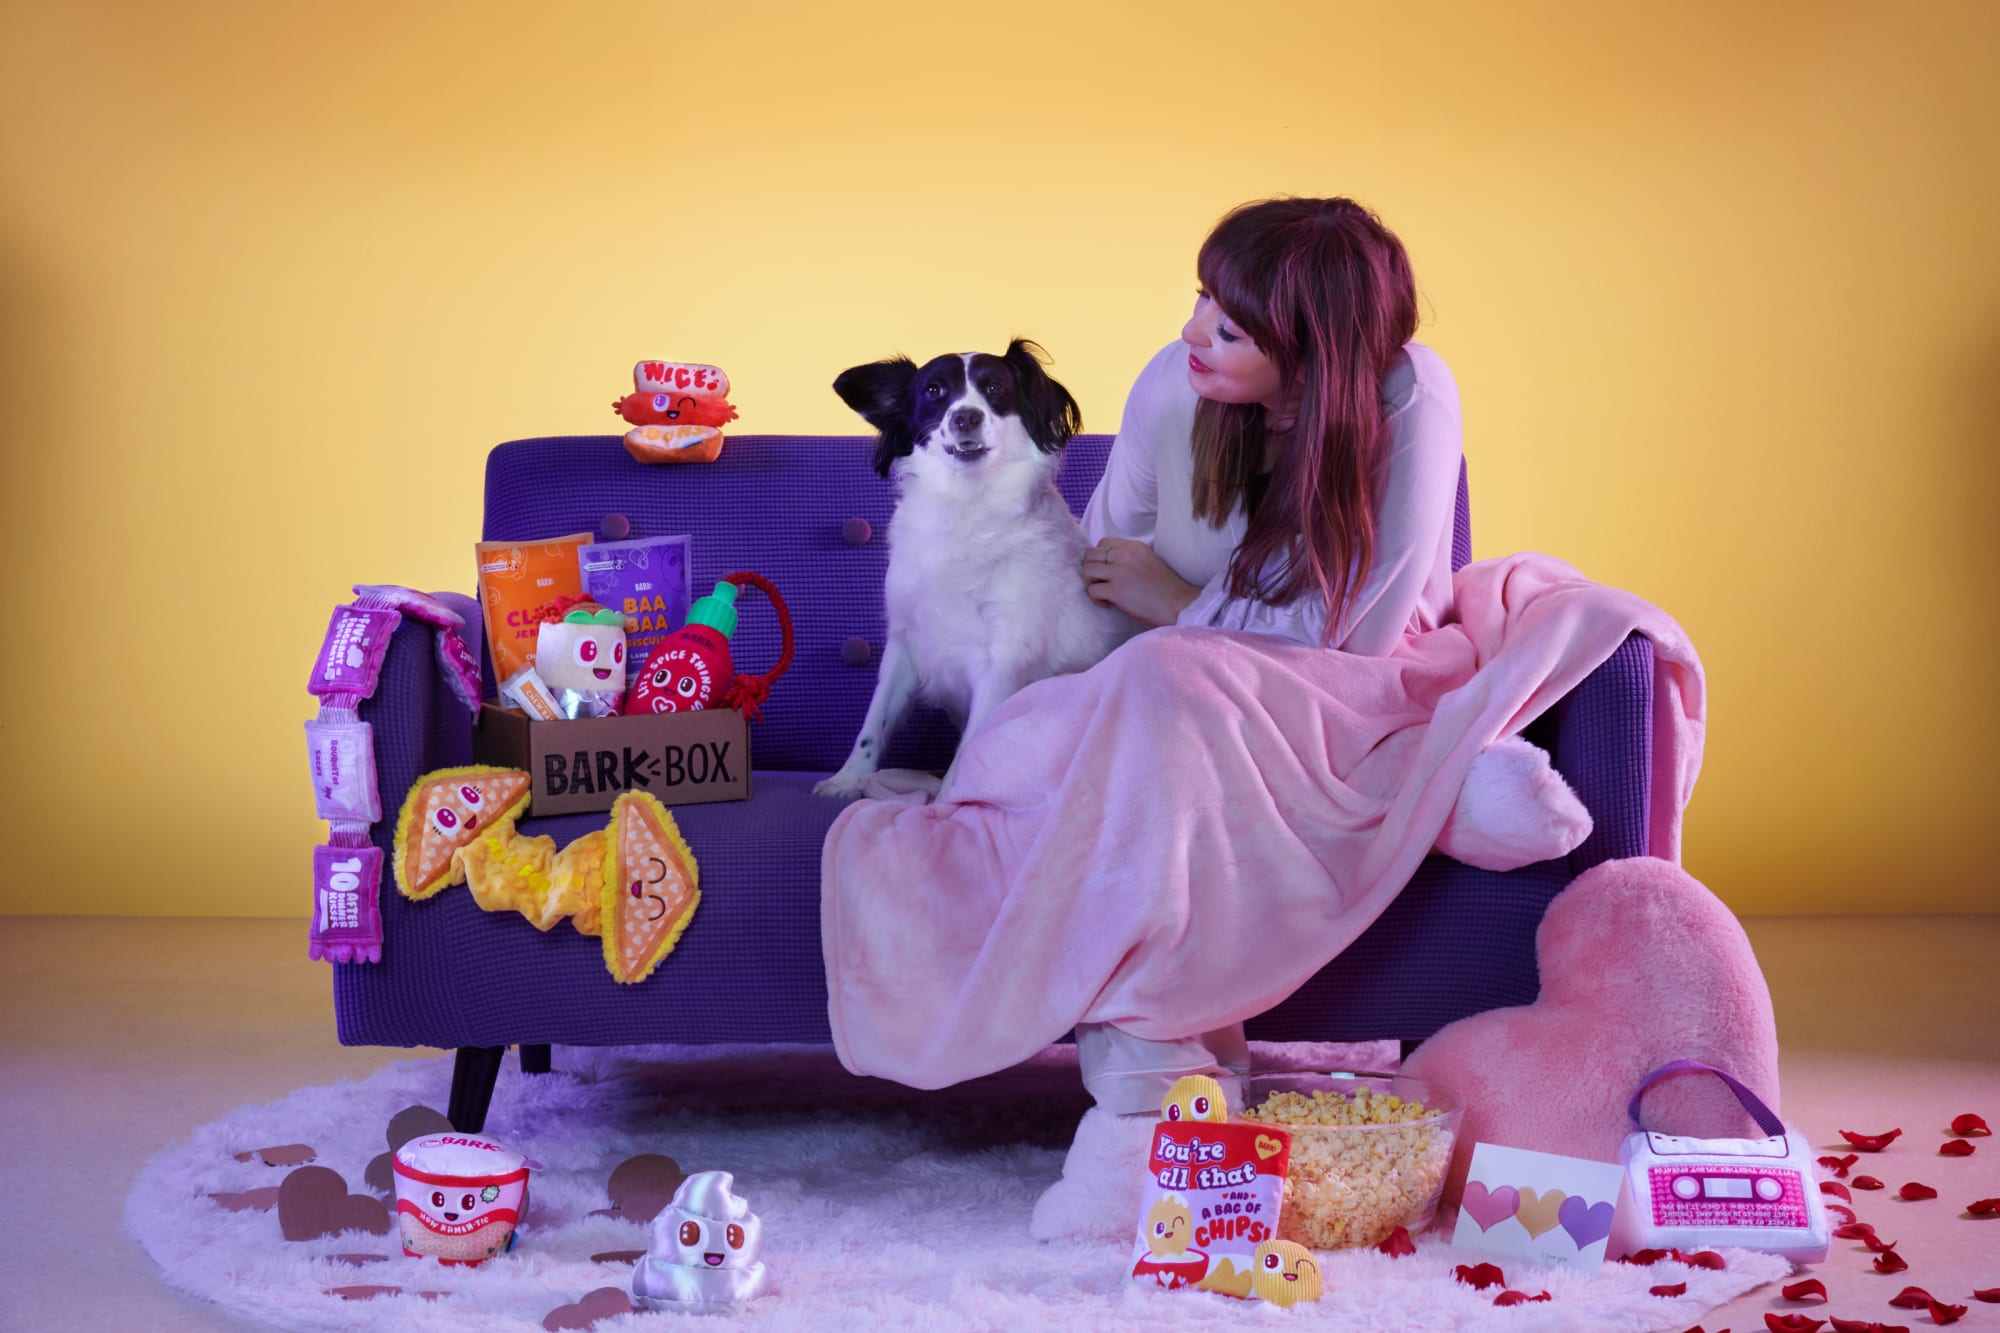 BarkBox is celebrating Valentine's Day with the perfect box and toys